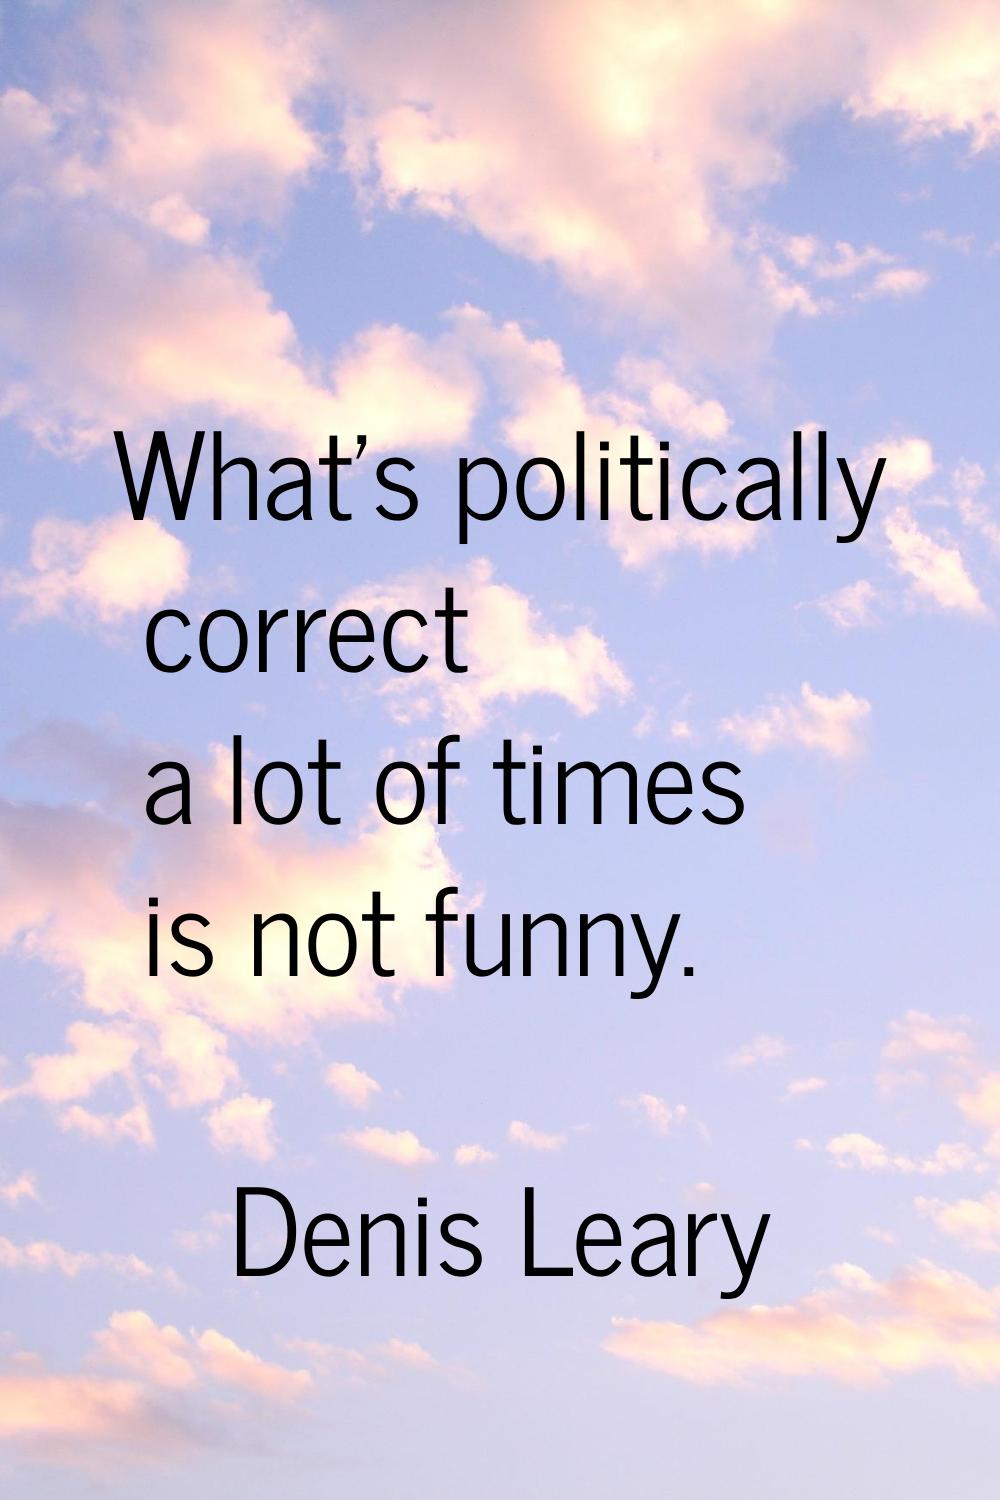 What's politically correct a lot of times is not funny.